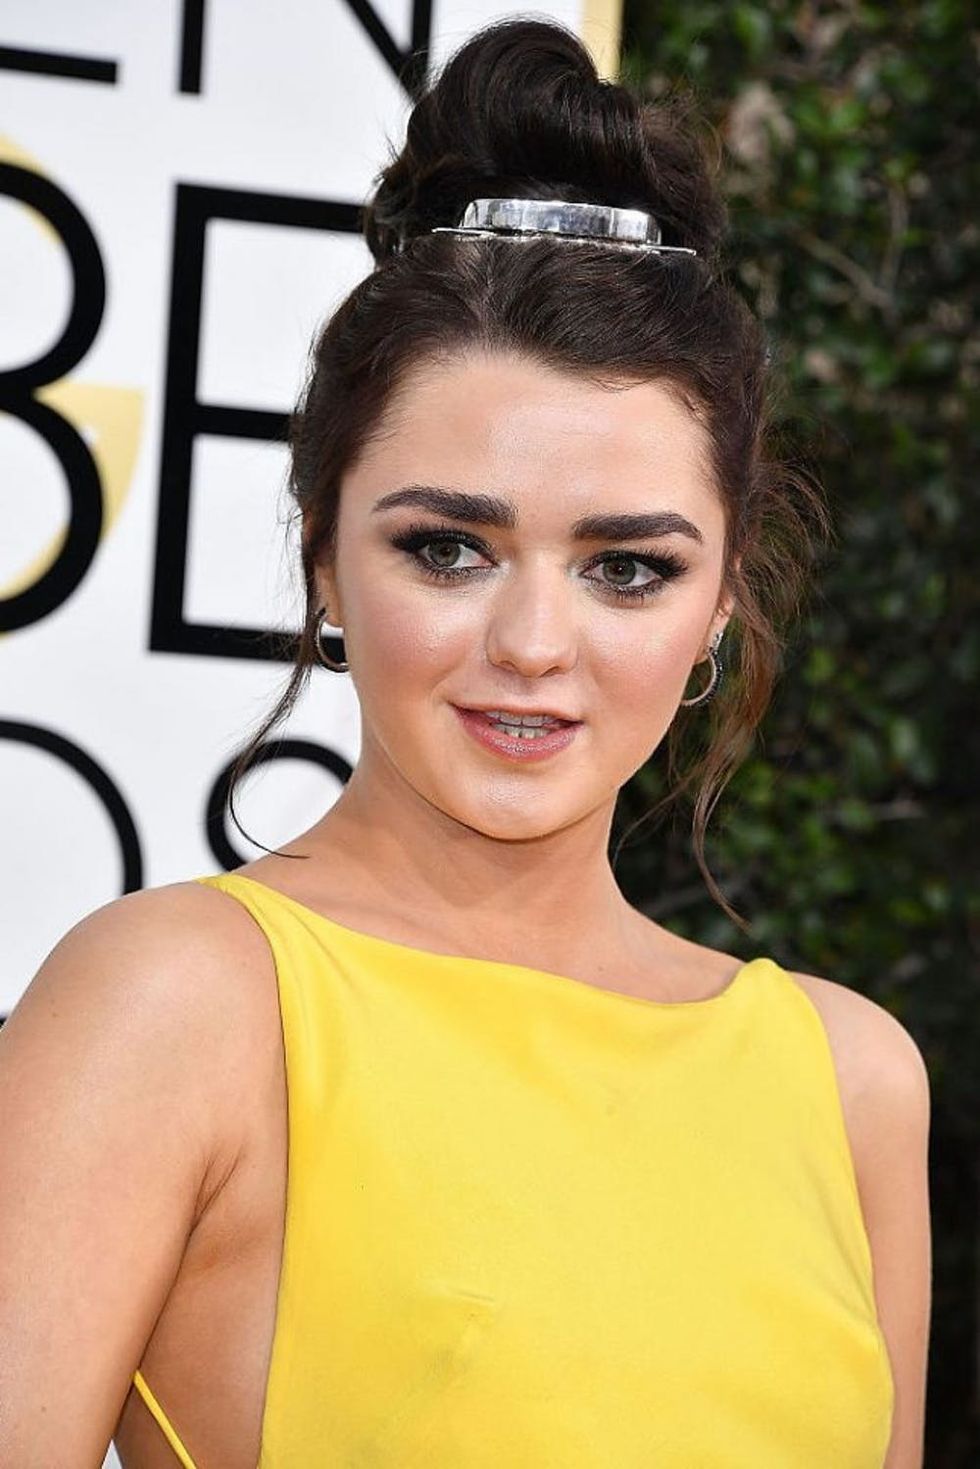 BEVERLY HILLS, CA - JANUARY 08: Maisie Williams arrives at the 74th Annual Golden Globe Awards at The Beverly Hilton Hotel on January 8, 2017 in Beverly Hills, California. (Photo by Steve Granitz/WireImage)